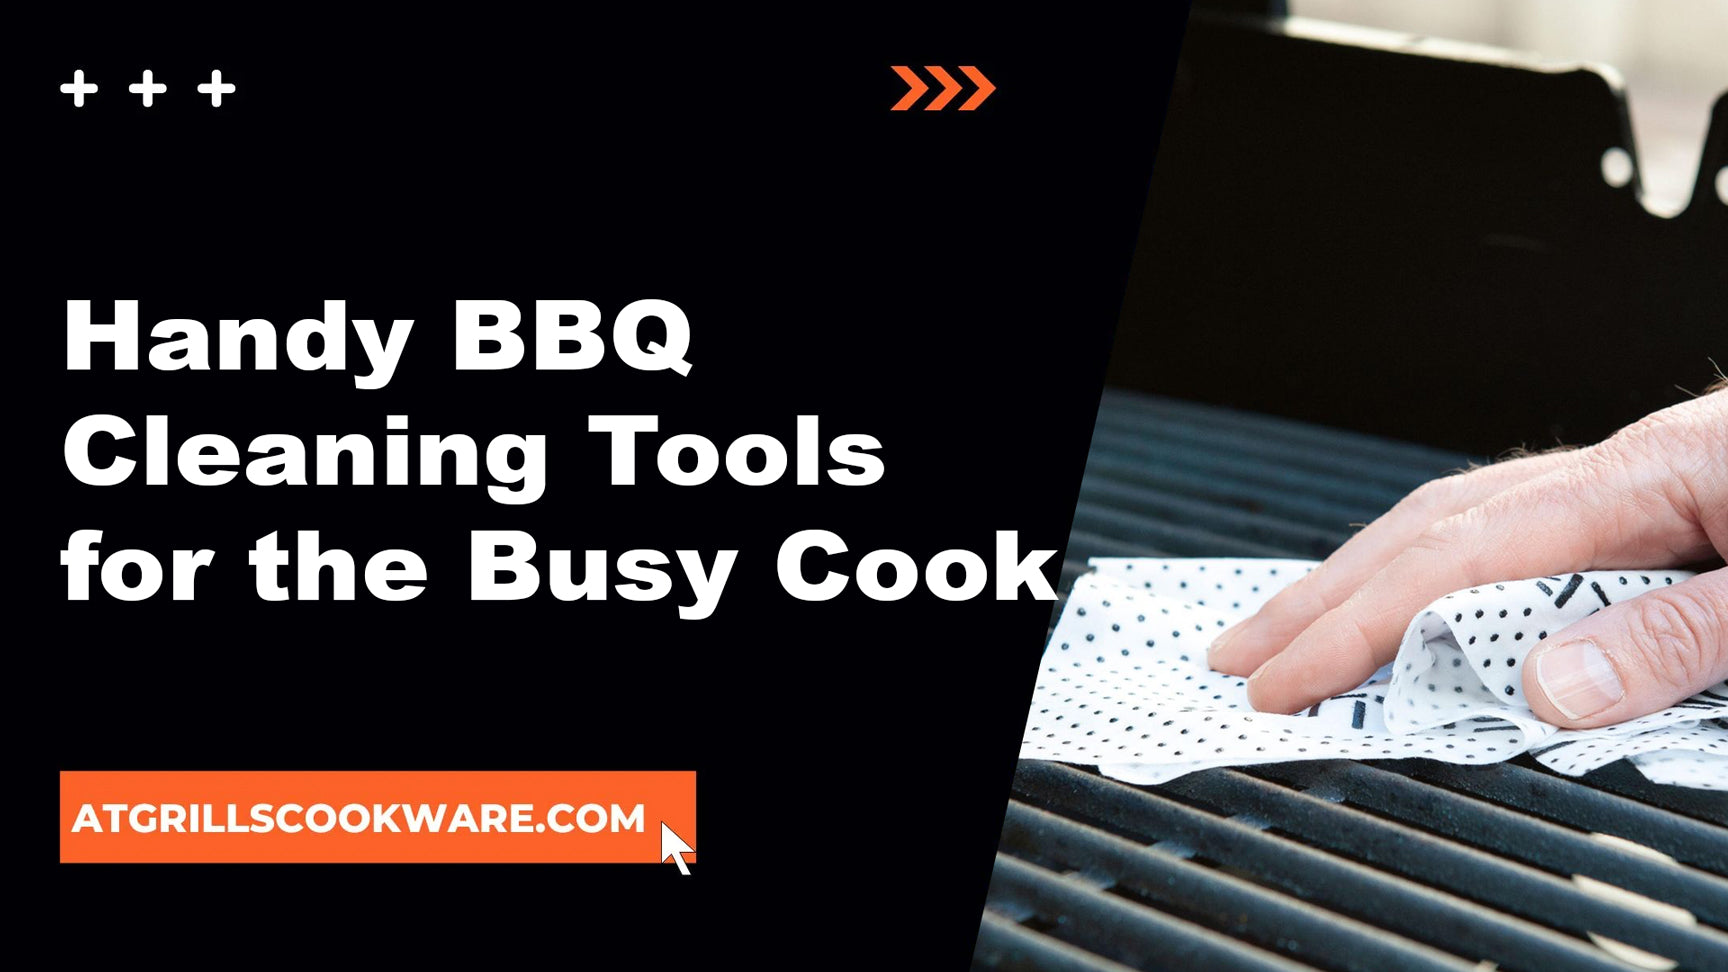 Handy BBQ Cleaning Tools for the Busy Cook